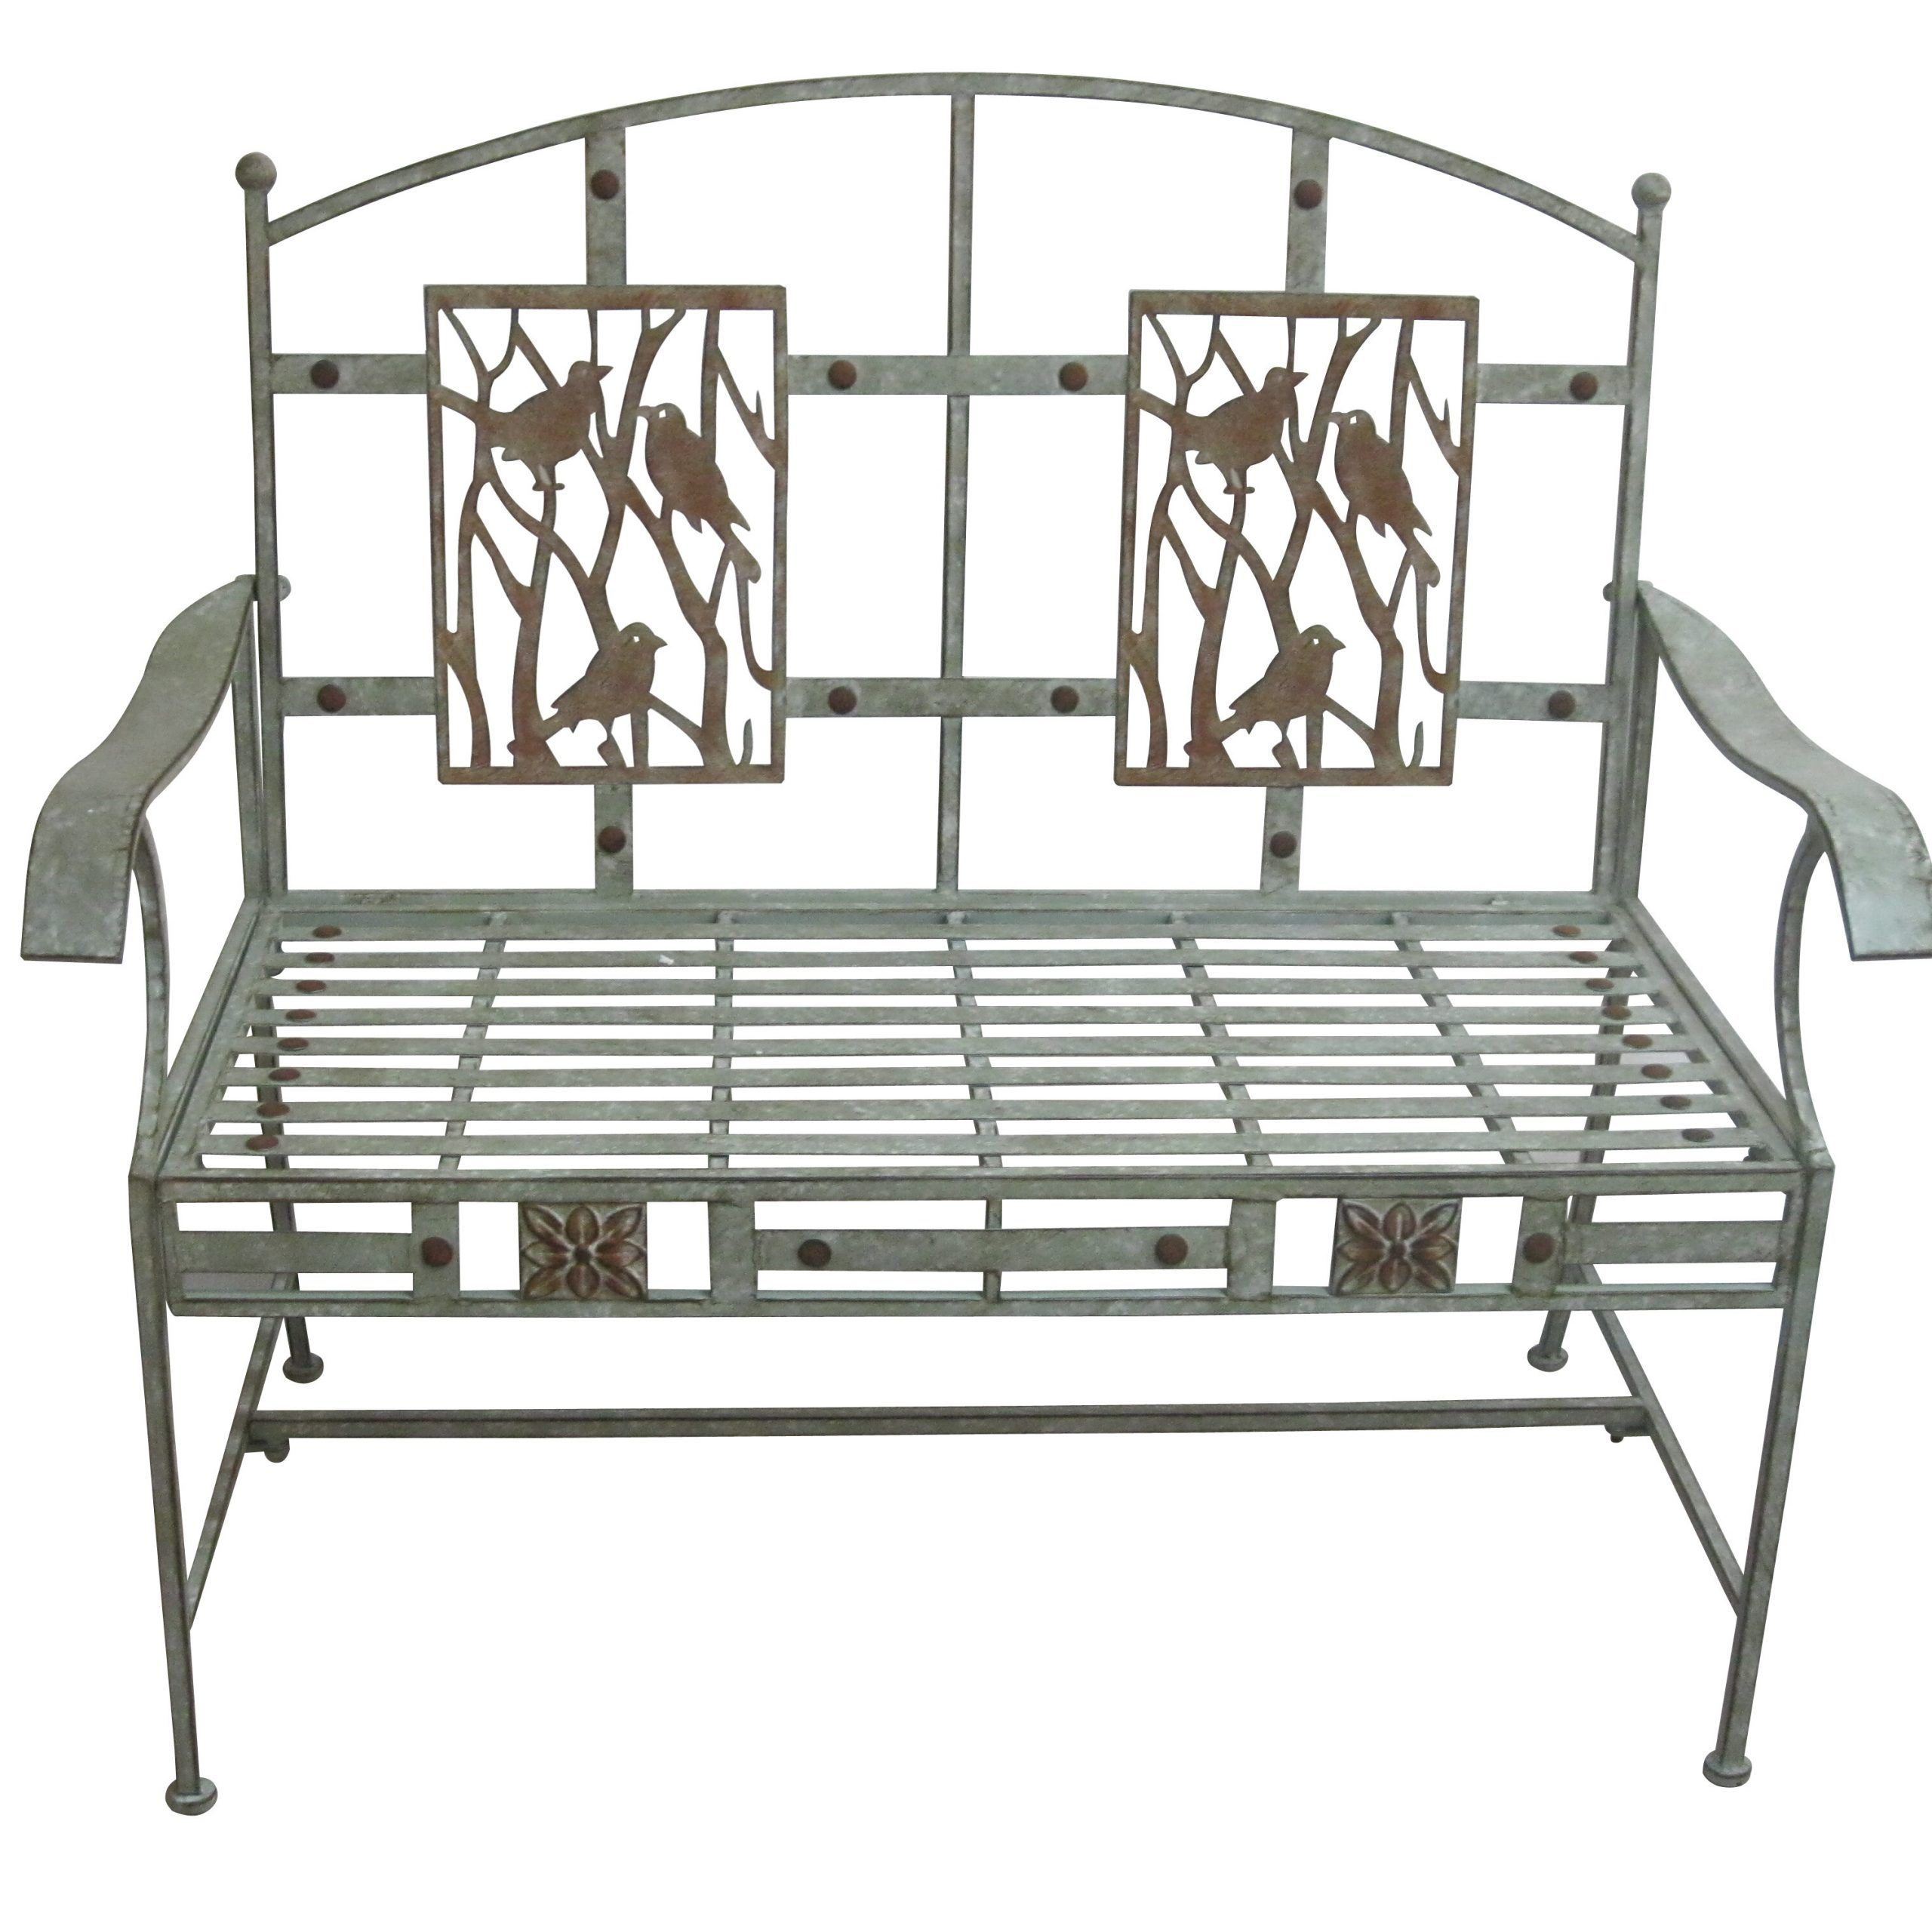 Rideout Metal Garden Bench Within Gehlert Traditional Patio Iron Garden Benches (View 8 of 25)